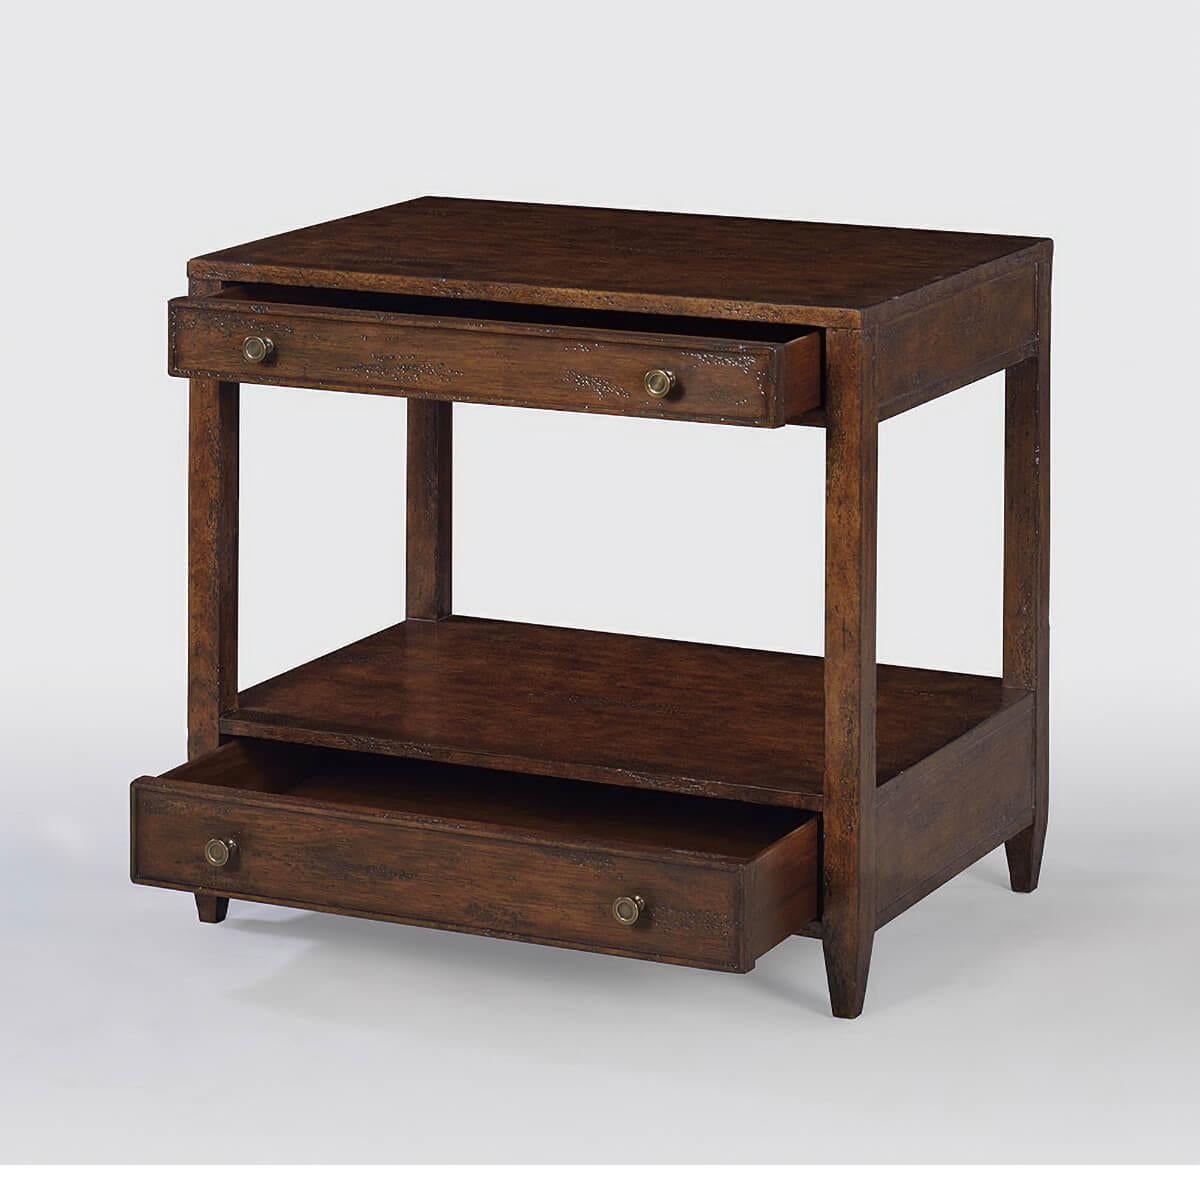 Classic nightstand - A wide rectangle side table with two drawers, brass hardware, and tapered feet, with a “country” dark mahogany tone with natural highlights, a hand-rubbed and distressed antiqued finish.

Dimensions: 28